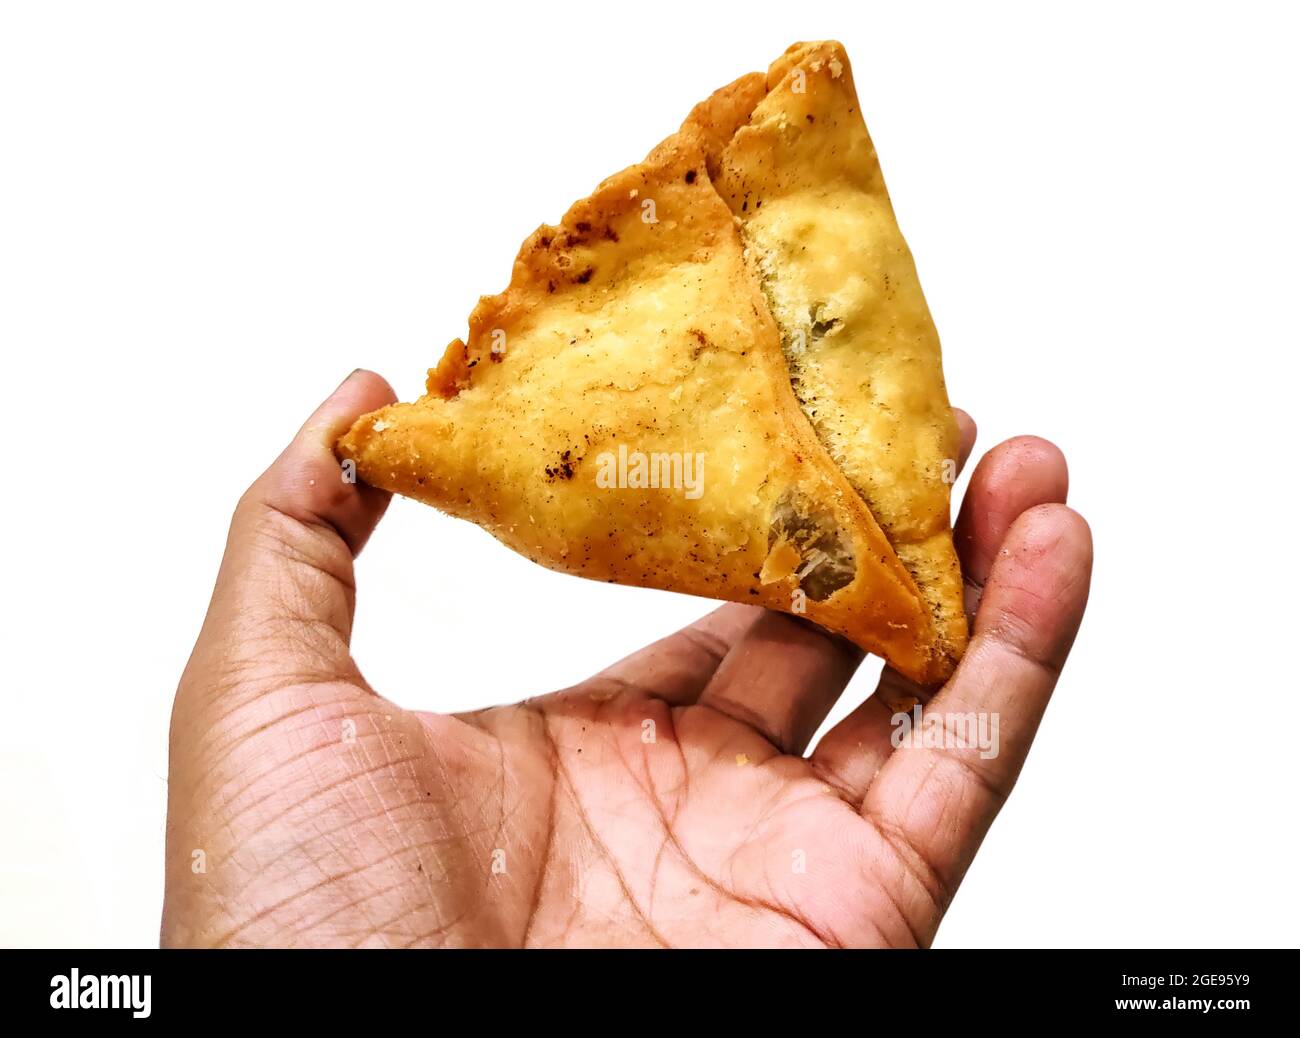 a-man-holding-fried-samosa-in-hand-isolated-on-white-background-2GE95Y9.jpg